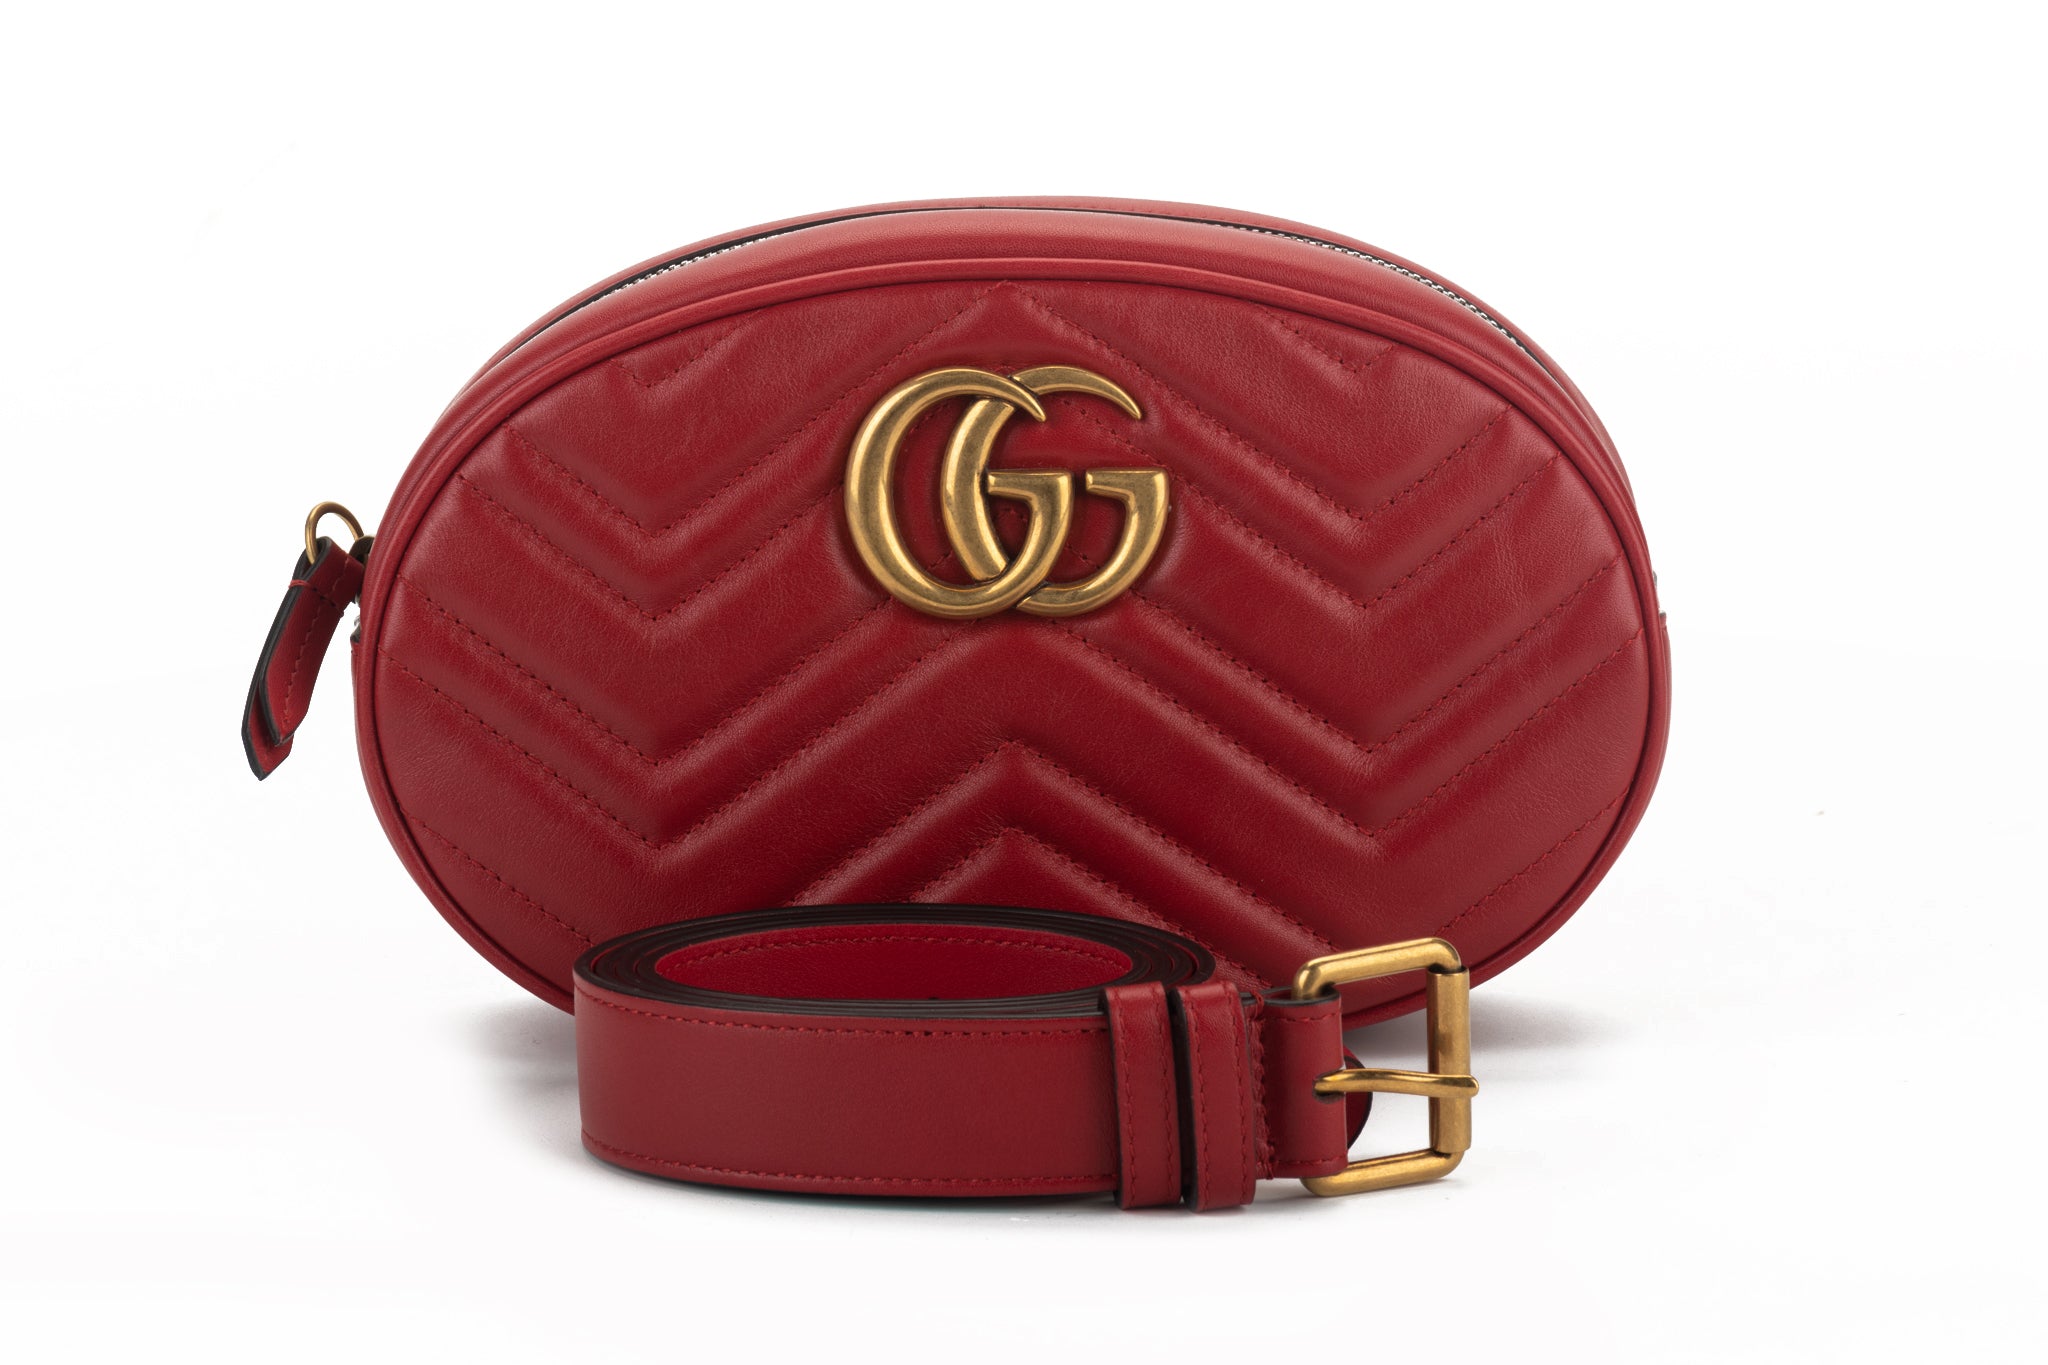 Gucci Large Red Fanny Pack With Logo - Vintage Lux